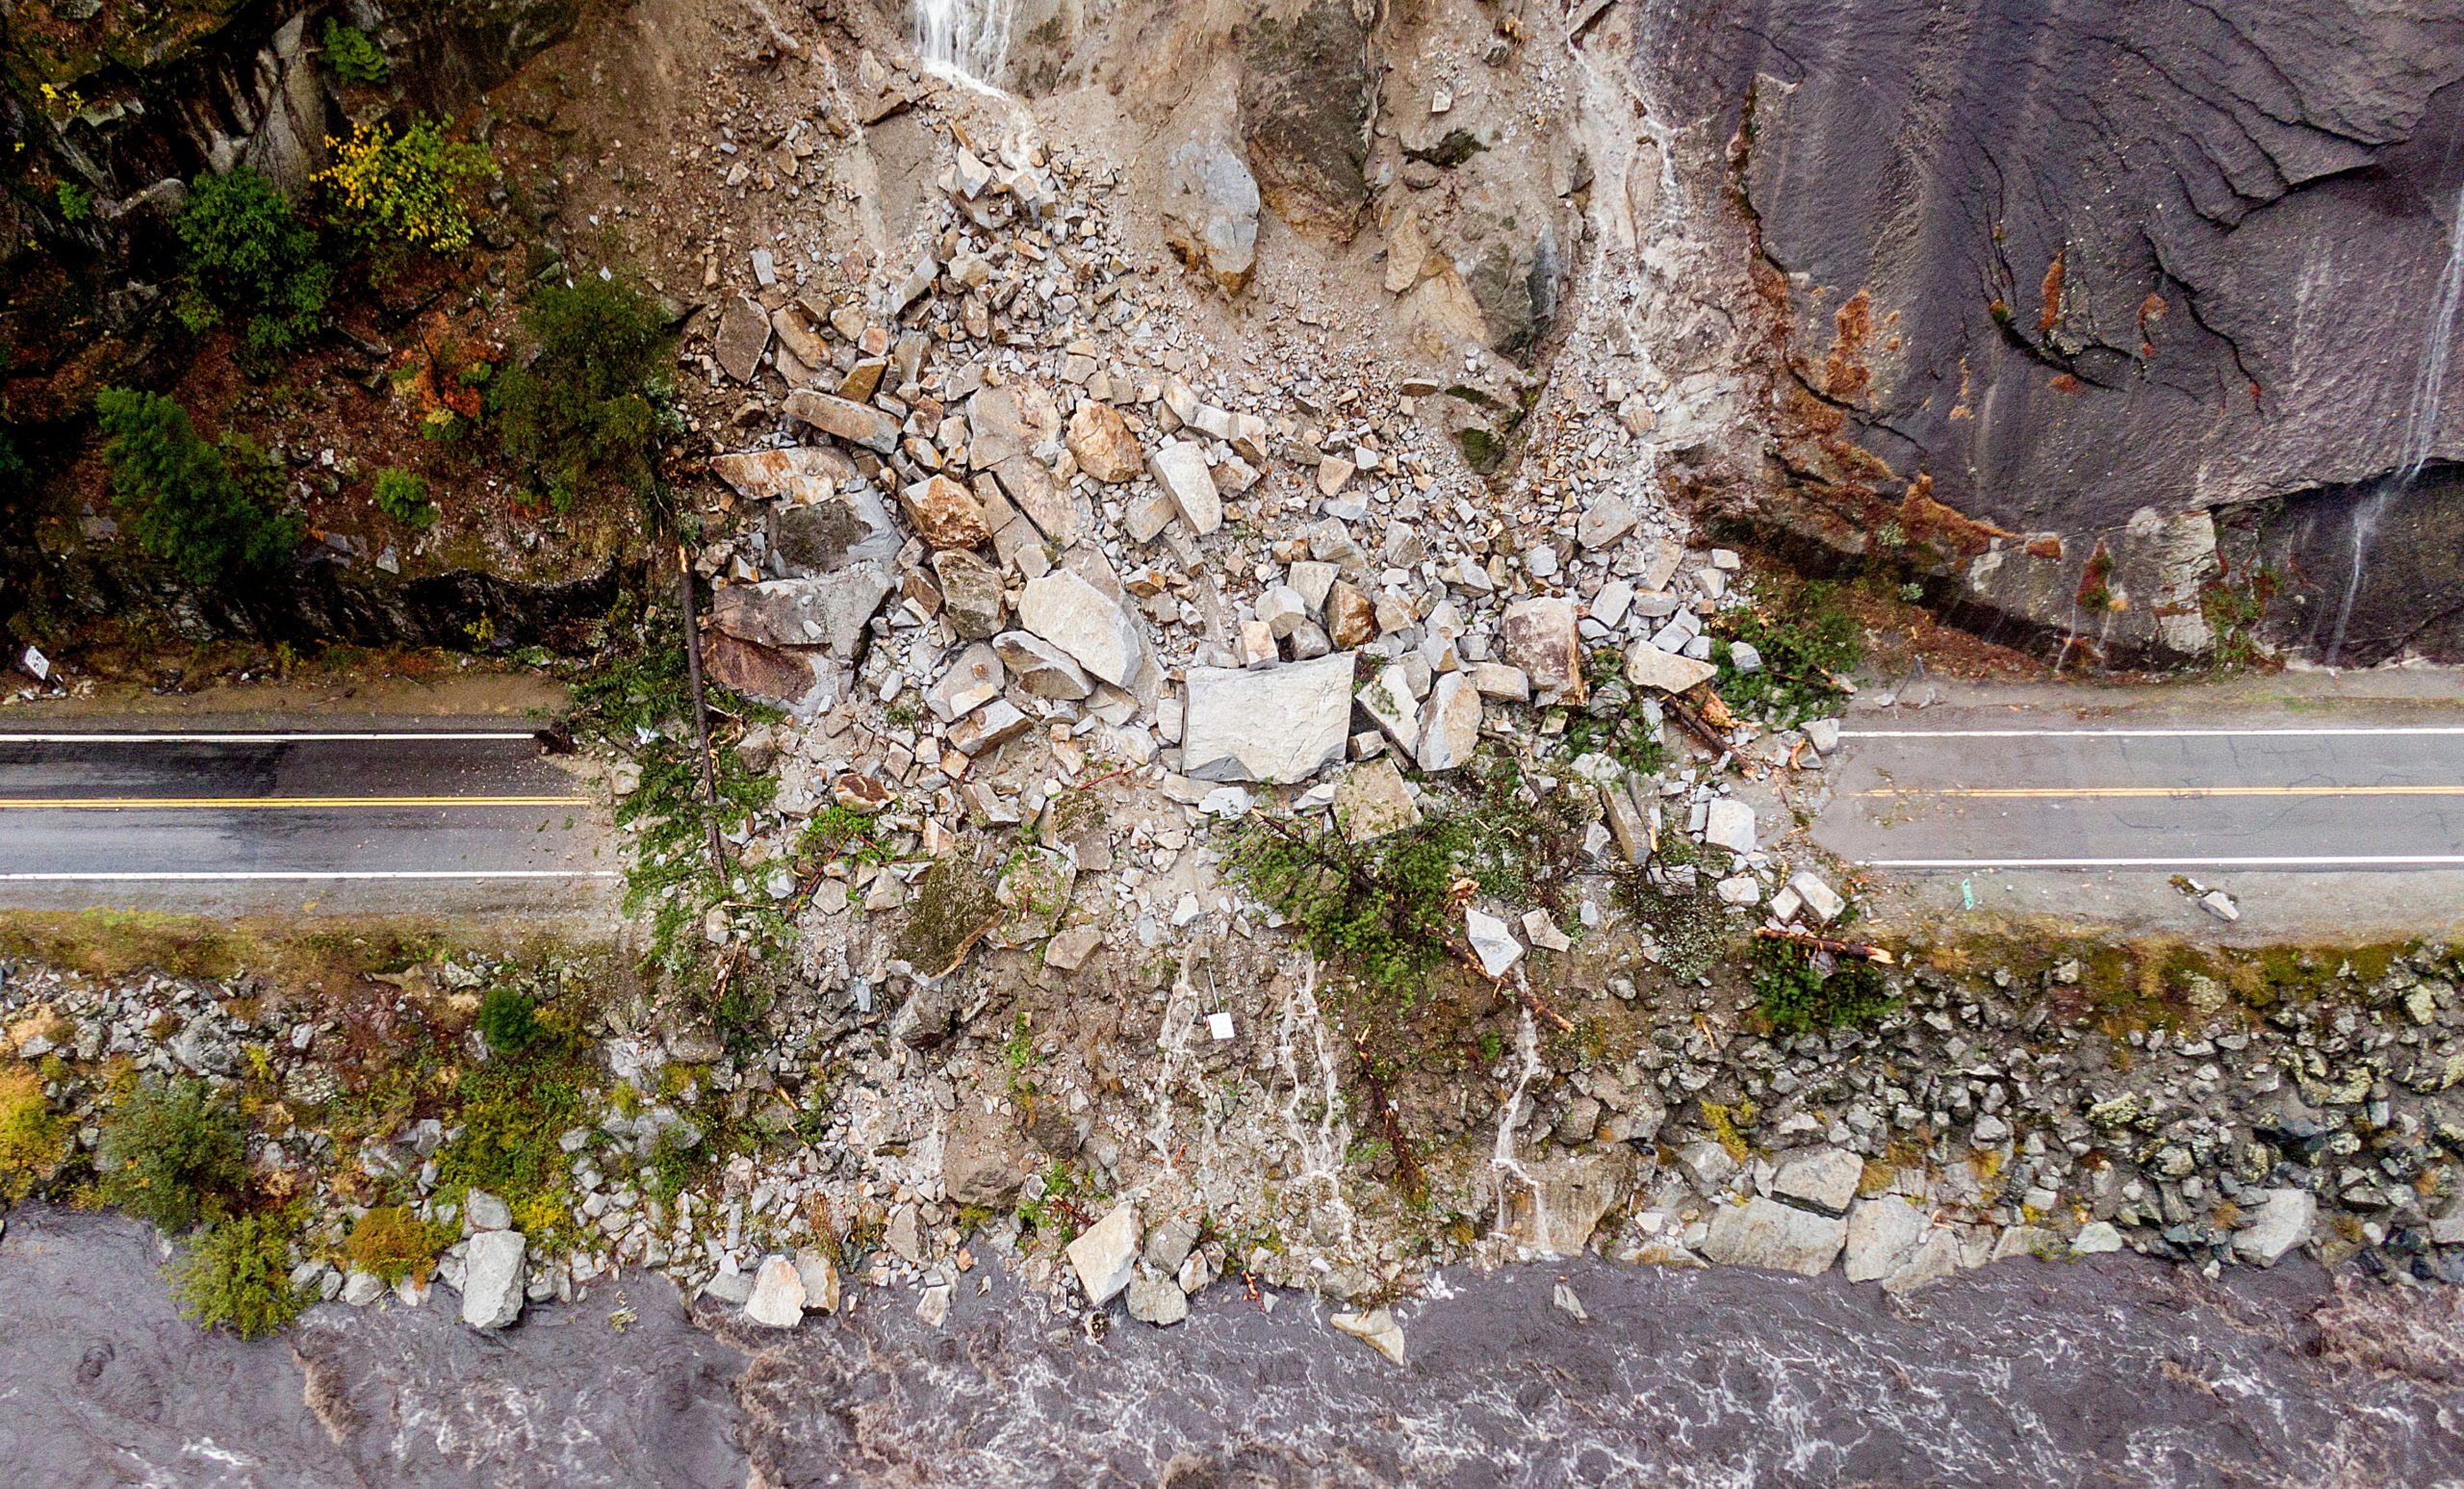 An aerial view of rocks and vegetation covering Highway 70 following a landslide in the Dixie Fire zone. (Photo: Noah Berger, AP)